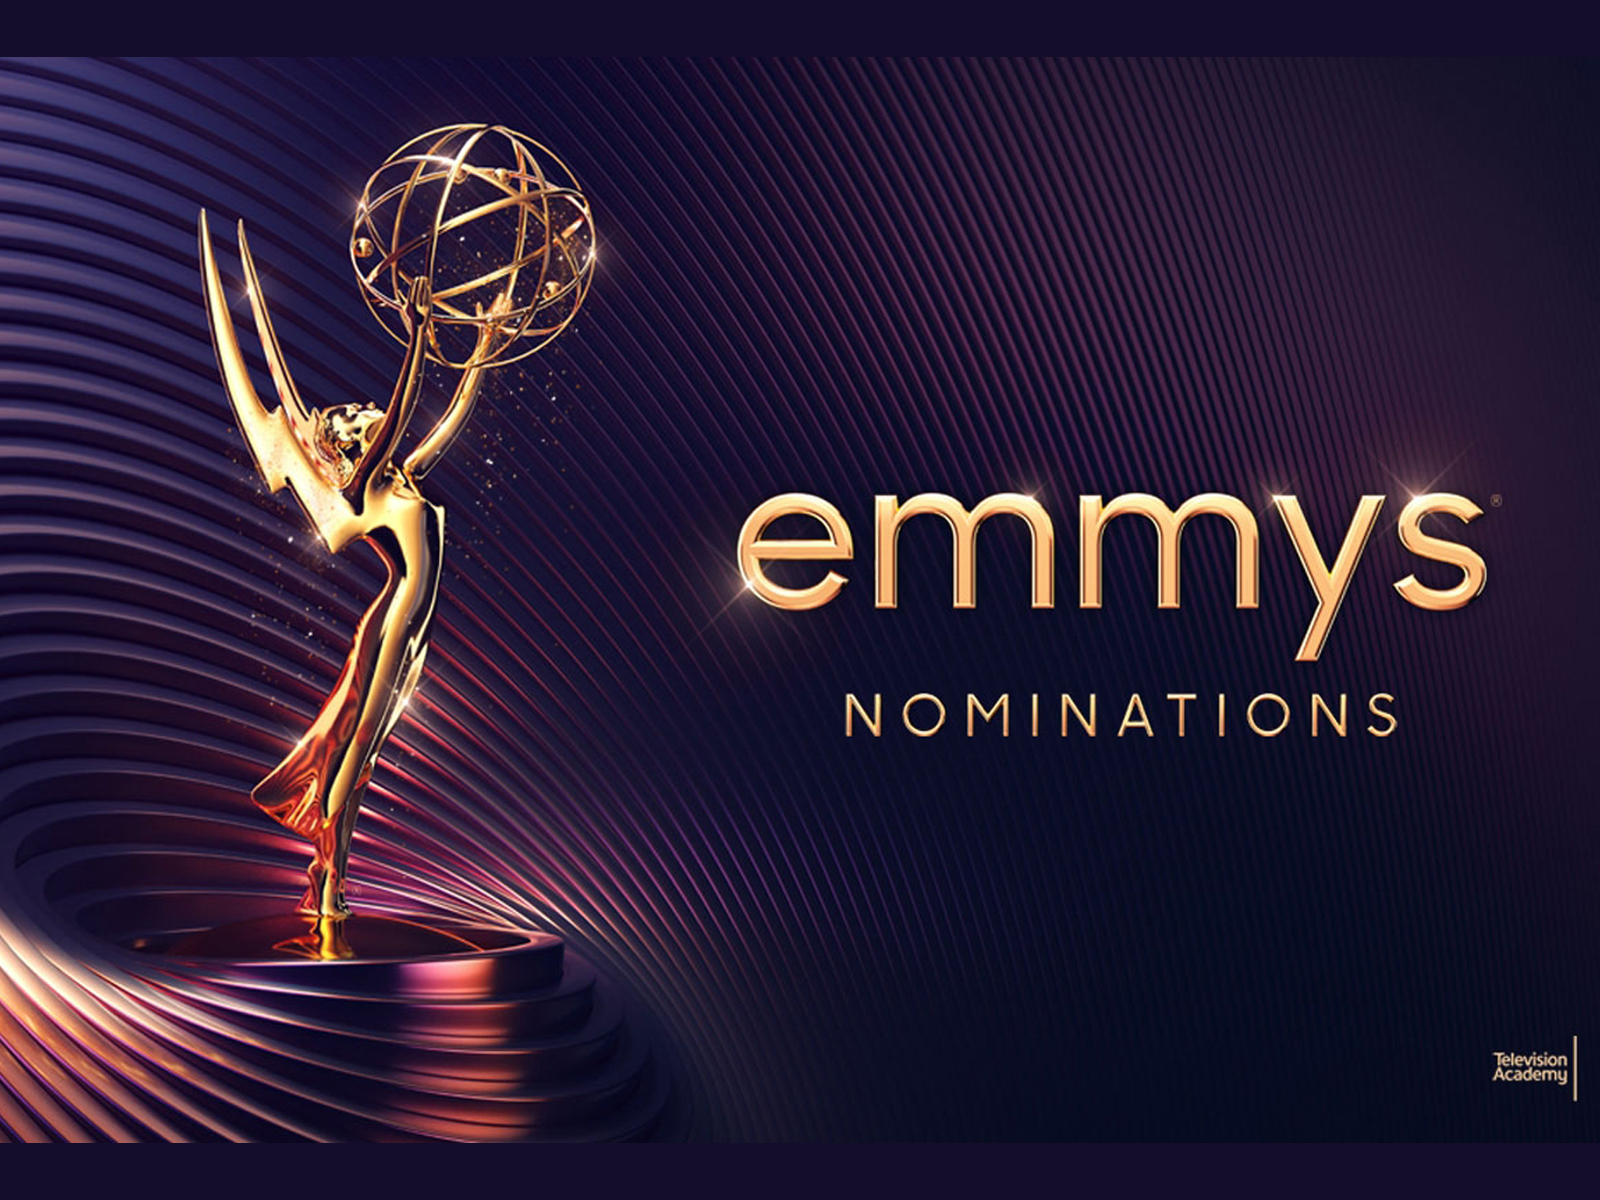 Nominations announced for 74th Emmy Awards